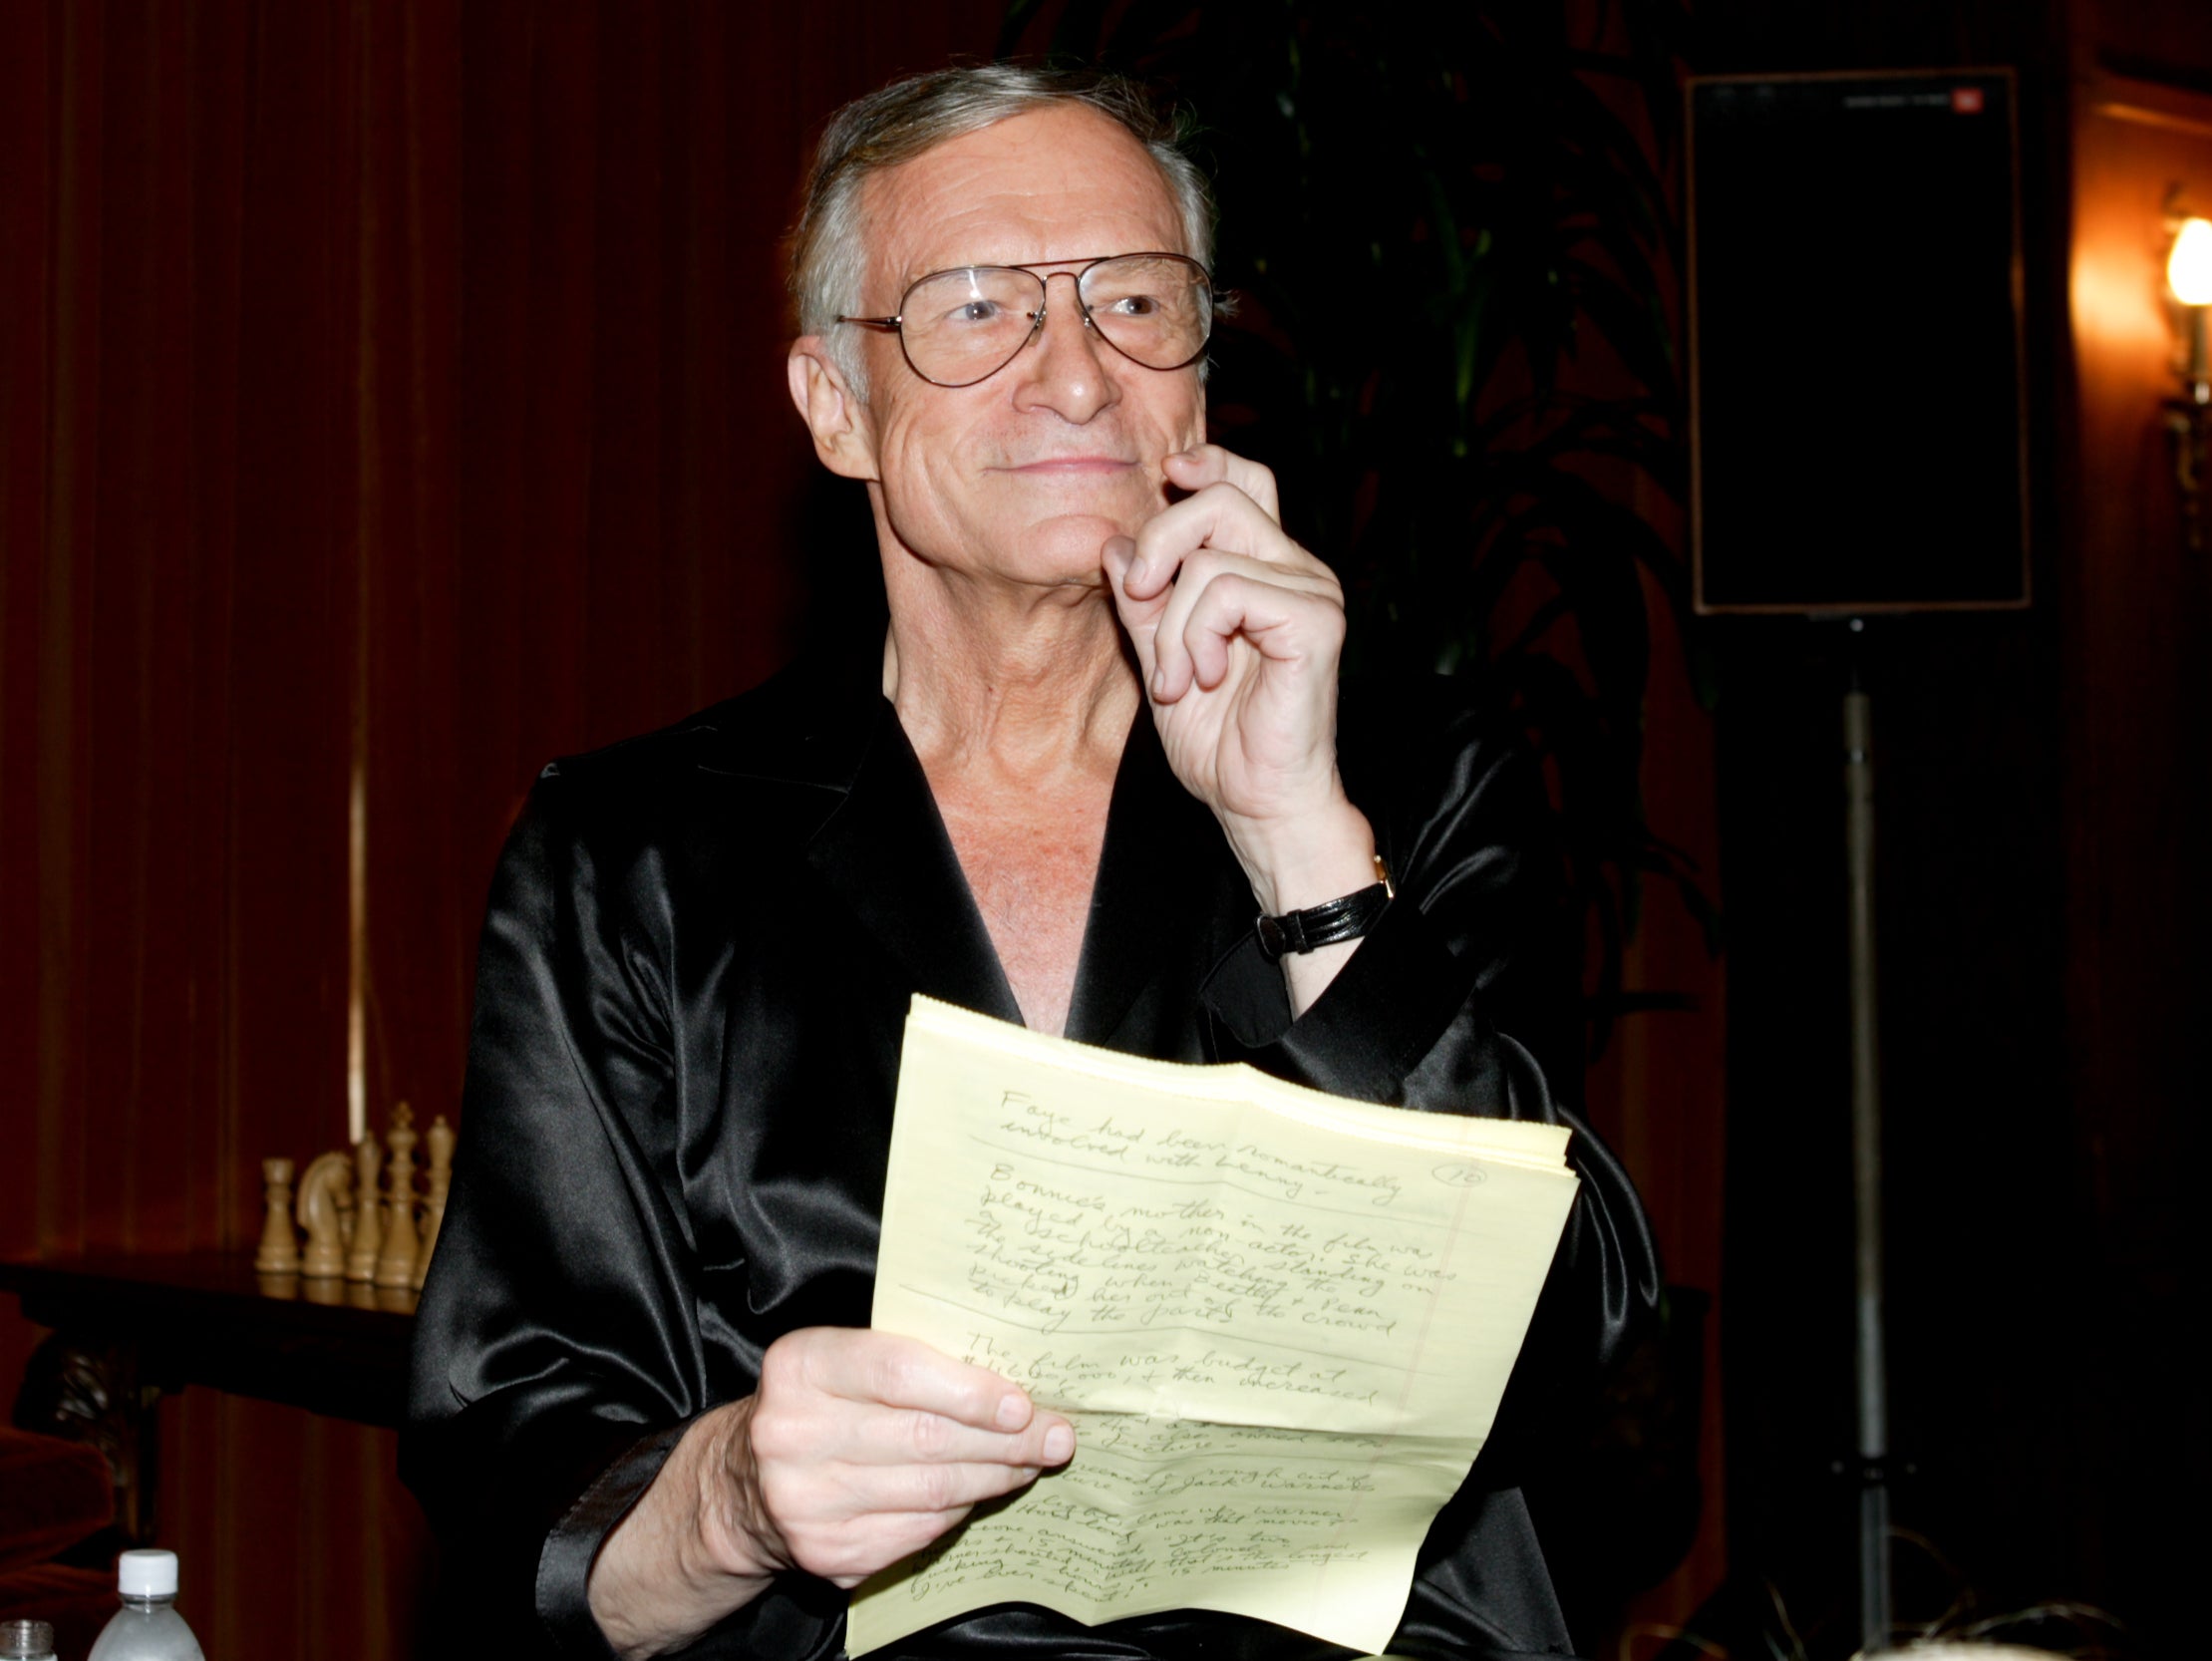 Hugh Hefner reads from his notes before a screening of ‘Bonnie and Clyde’ at the Playboy Mansion on 18 June 2004 in Los Angeles, California